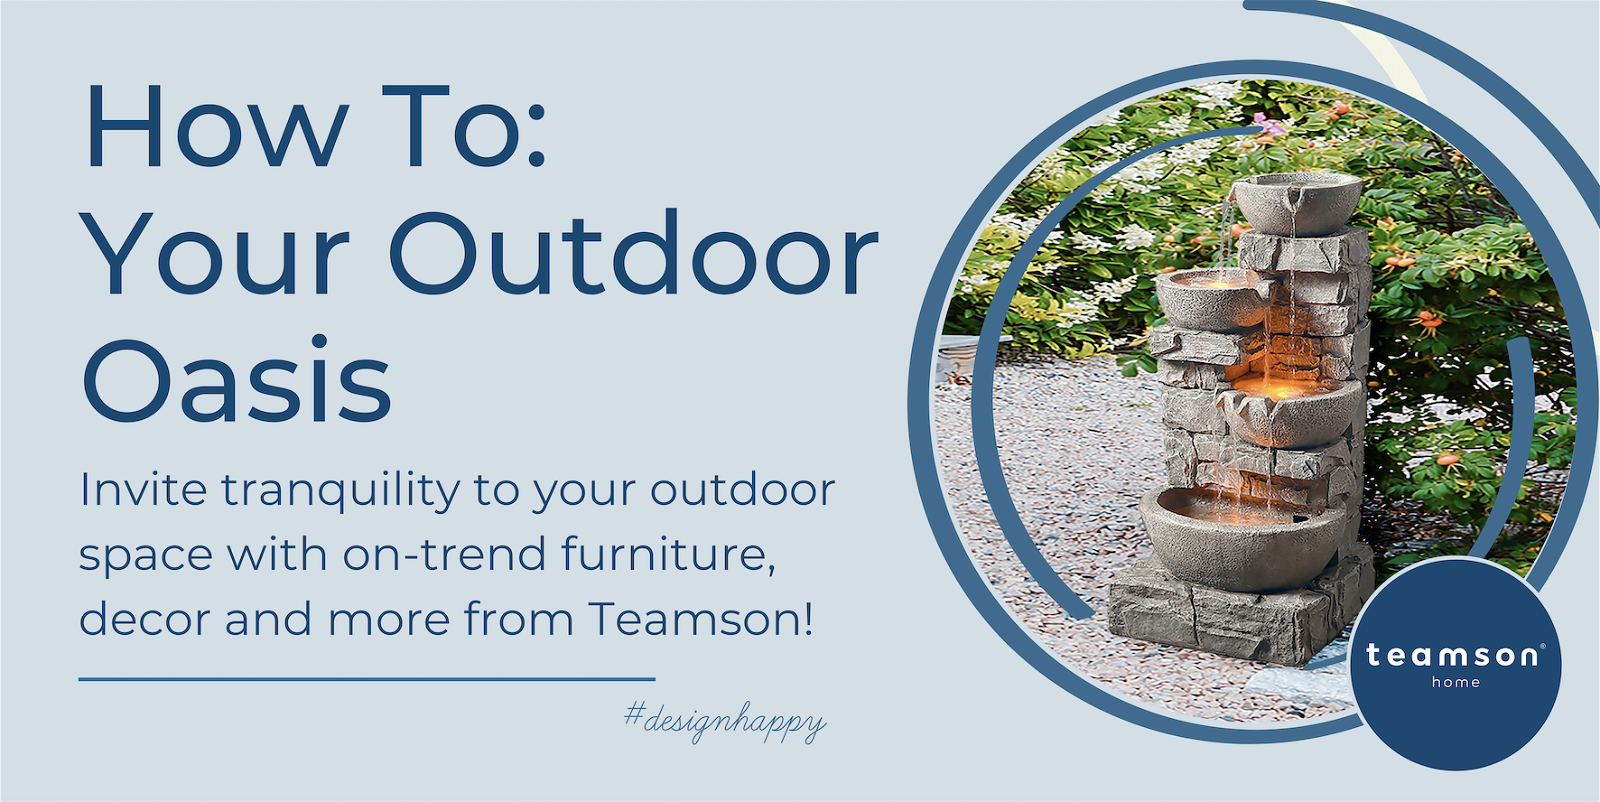 How to: Your Outdoor Oasis. Invite tranquility to your outdoor space with on-trend furniture, decor and more from Teamson! Design Happy. A floor water fountain sits in an outdoor space circled by a navy blue frame.